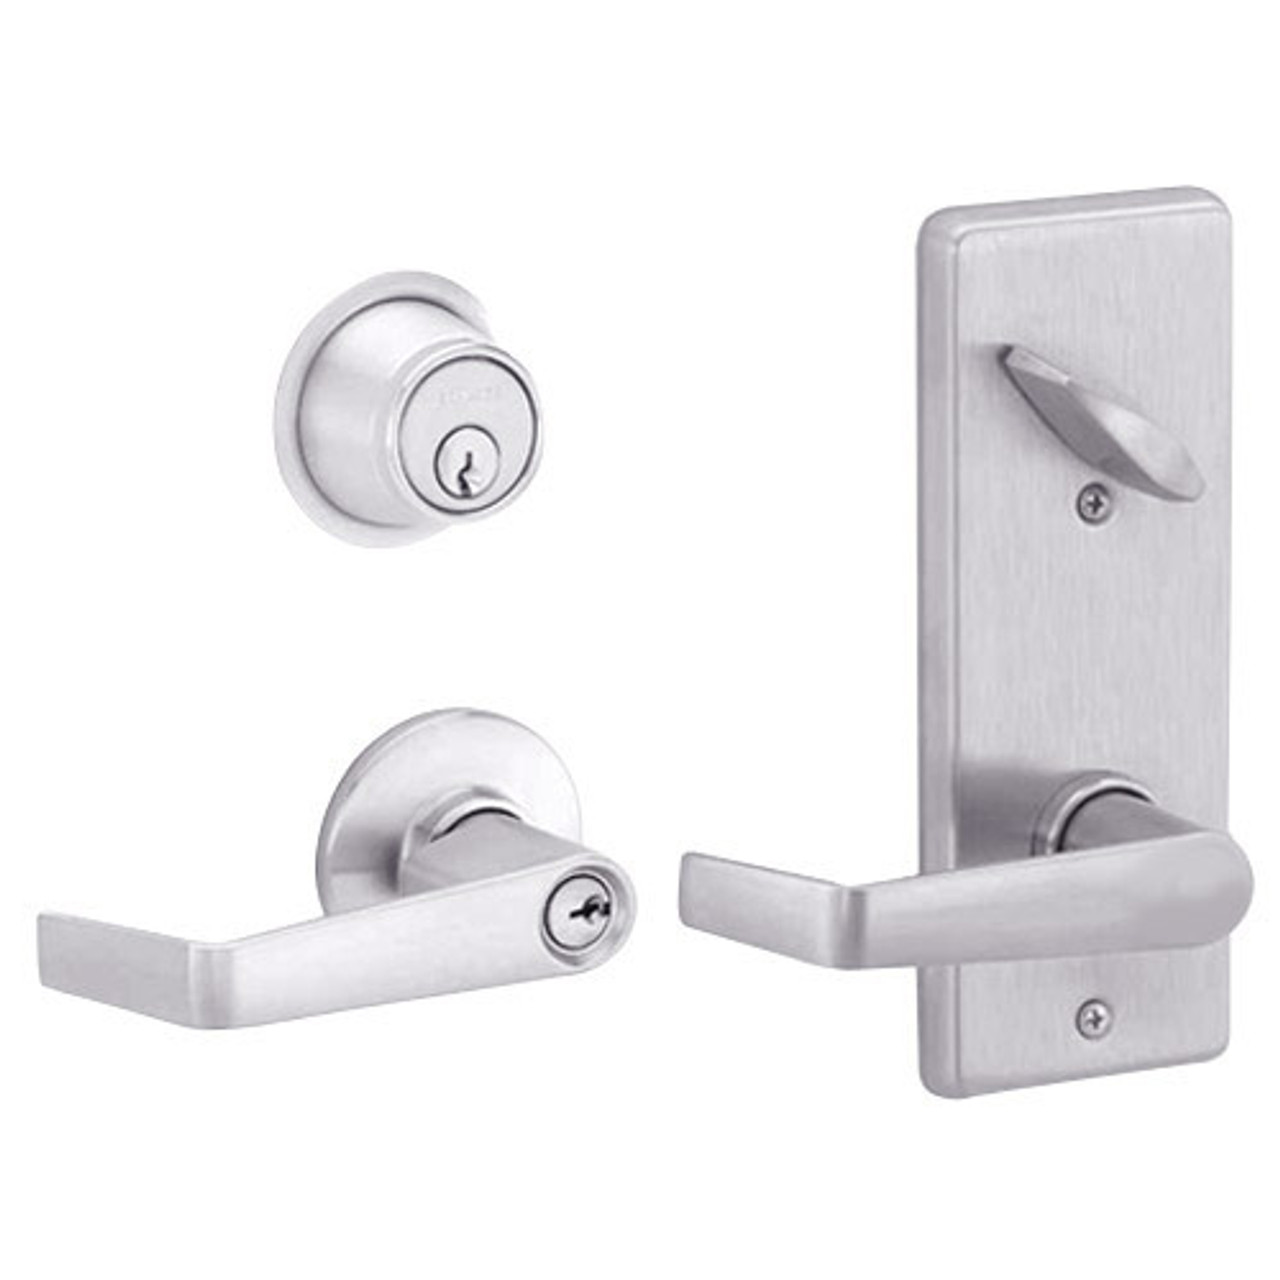 S270PD-SAT-626 Schlage S270PD Saturn Style Interconnected Lock in Satin Chromium Plated